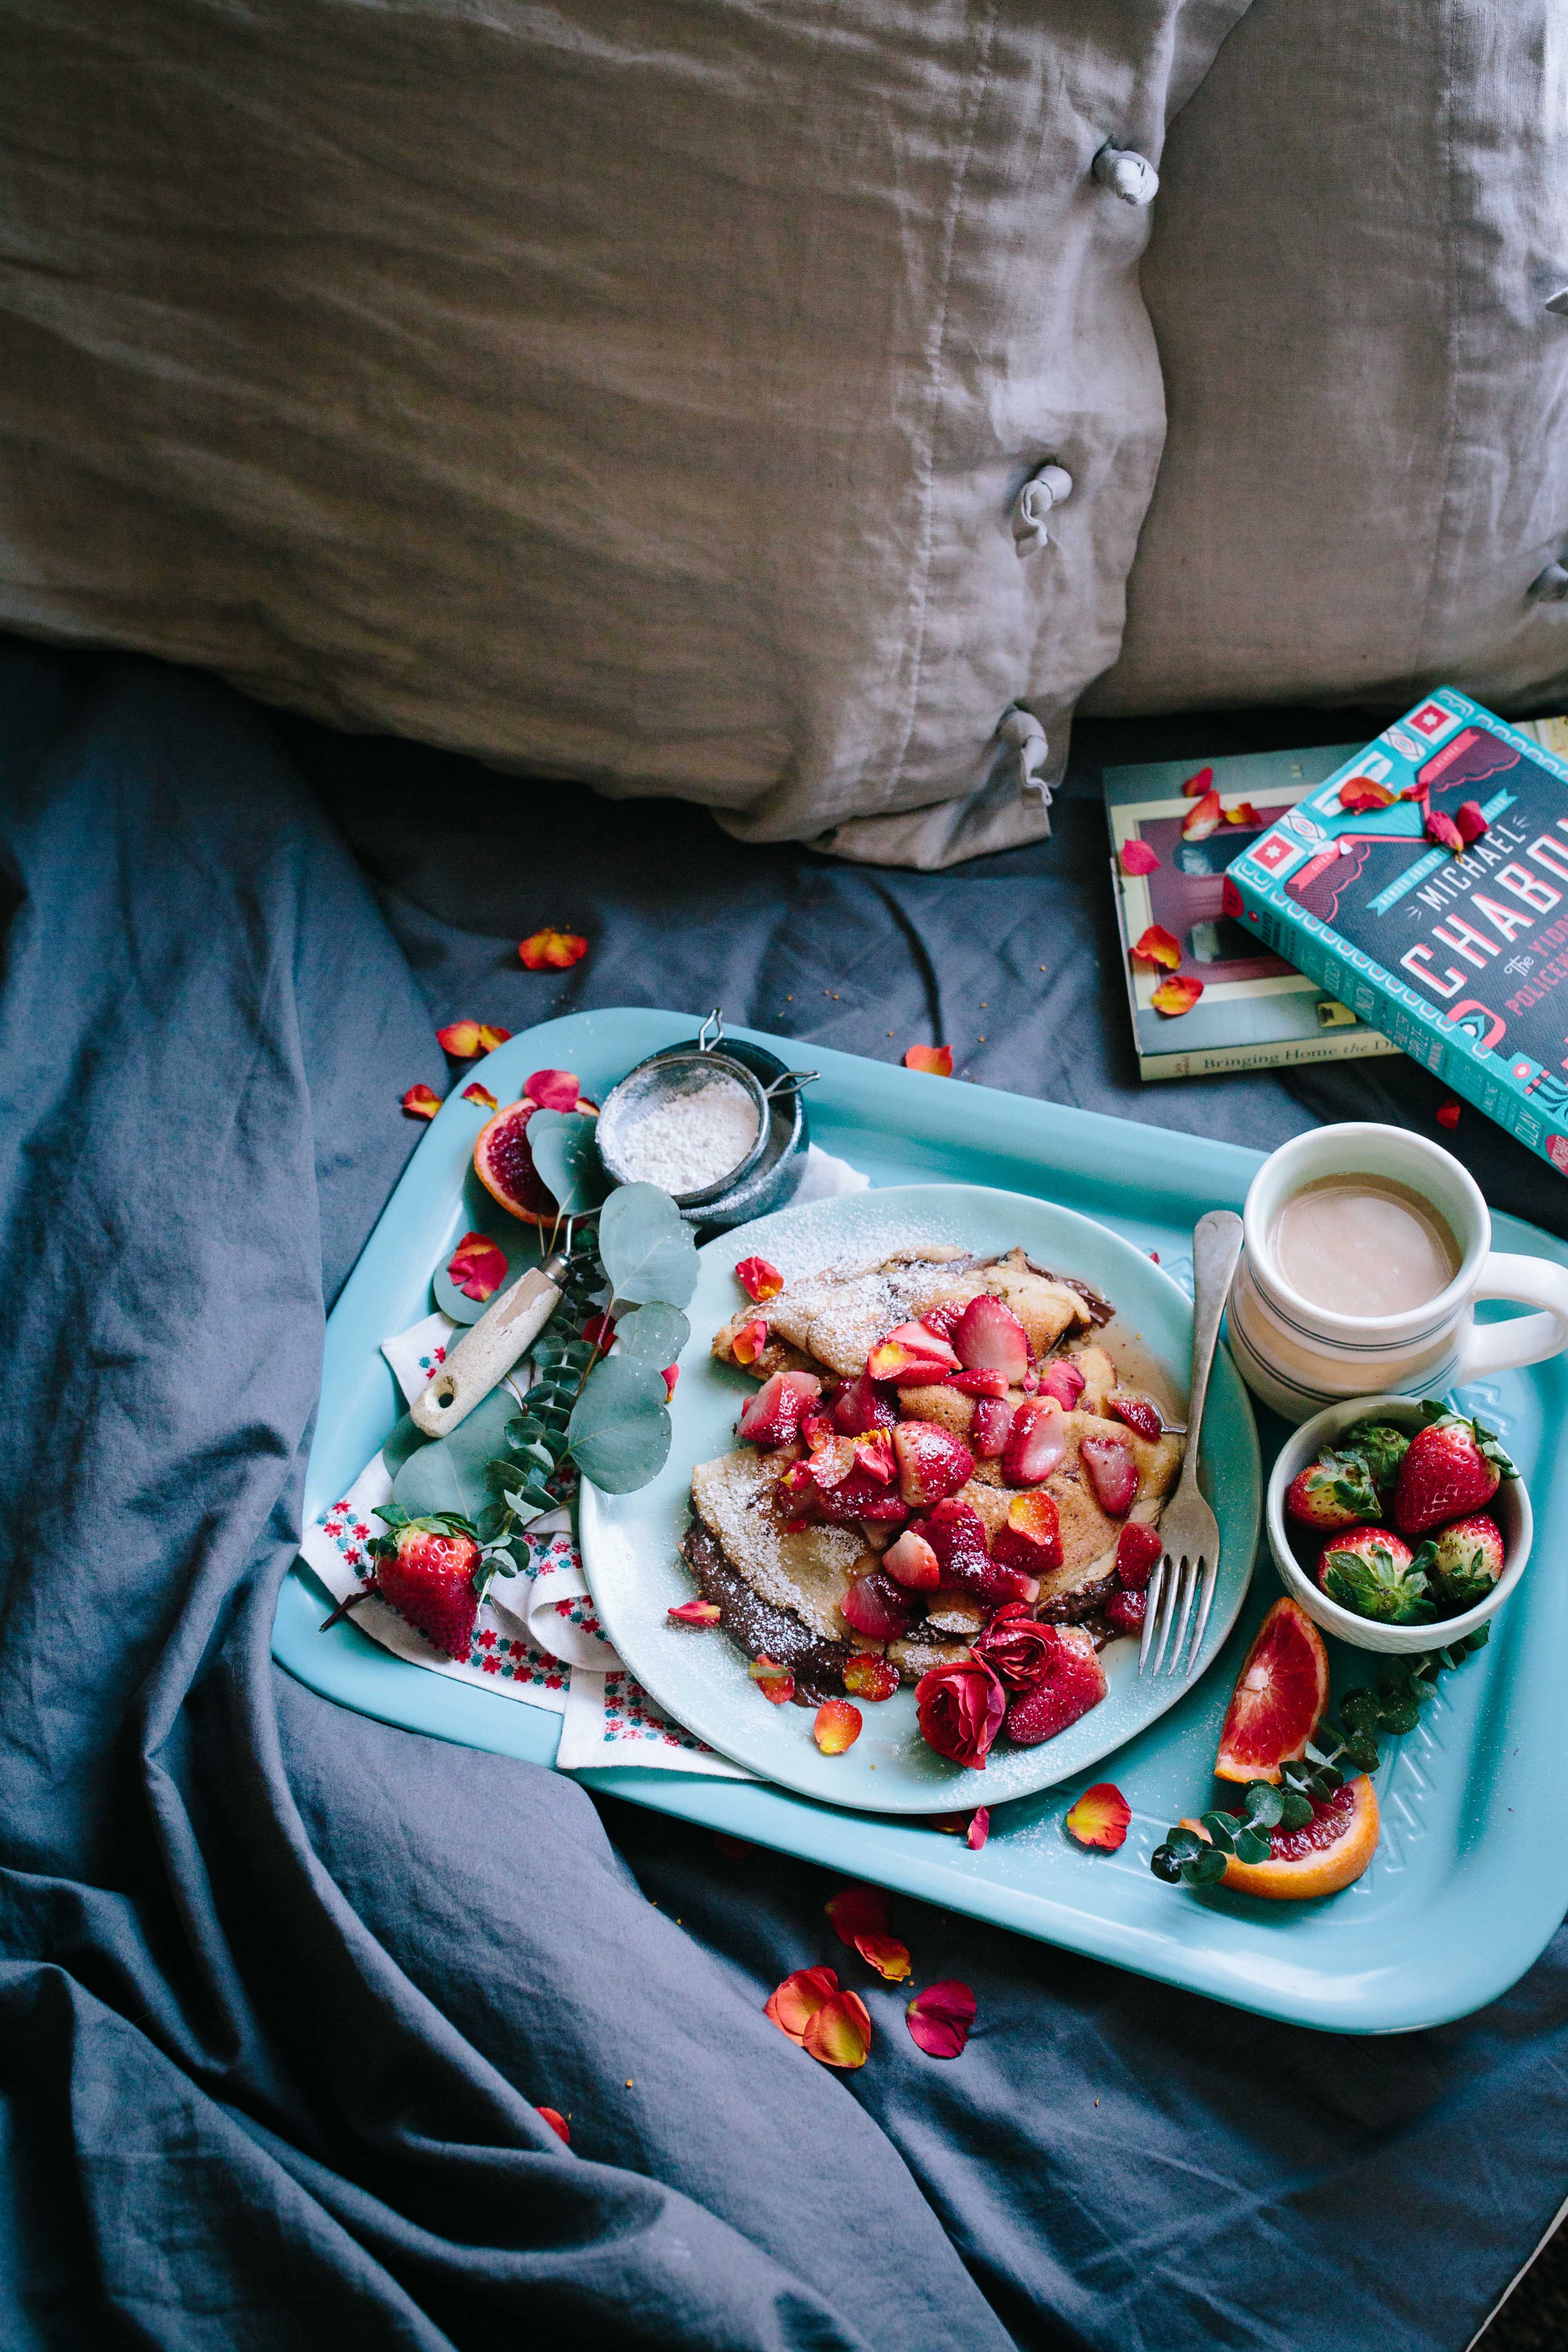 food, books, bed, tray, breakfast